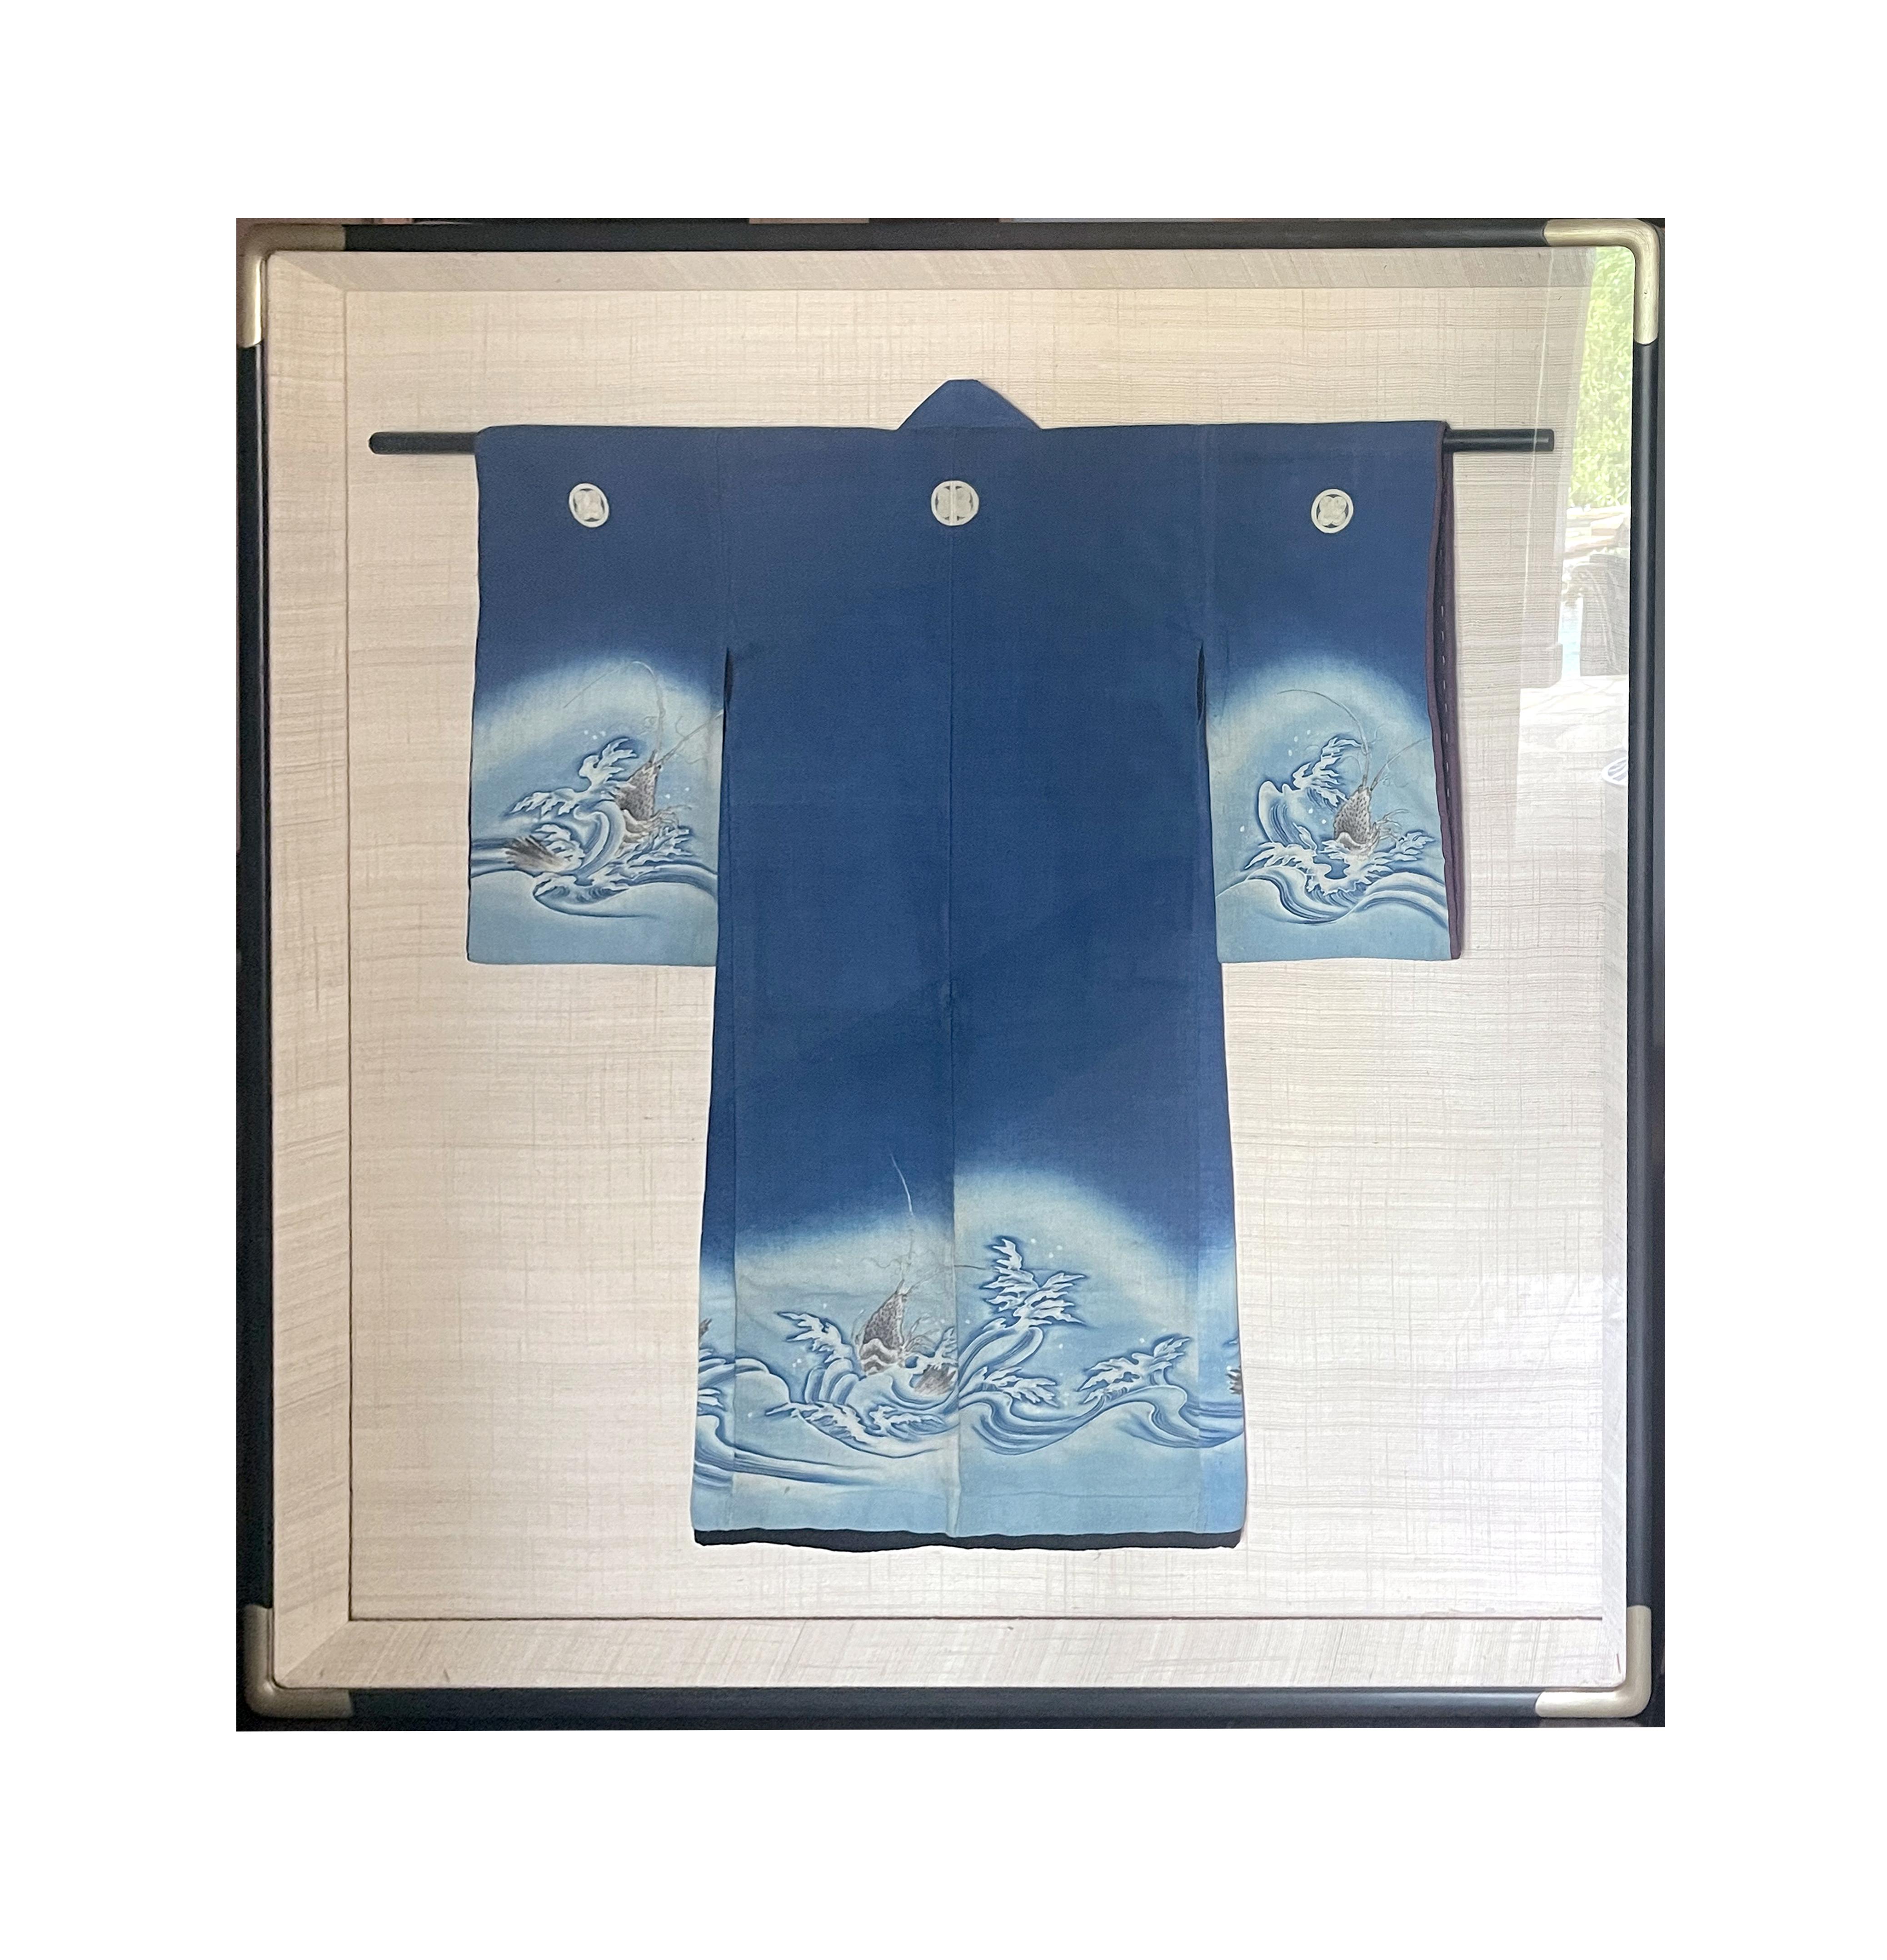 A Japanese Fisherman's Festival Kimono circa late 19th to early 20th century Meiji period. Made from indigo dyed cotton with thin inner padding and lining, the kimono appears to fit a teen boy due to its size. The lower part of the main body